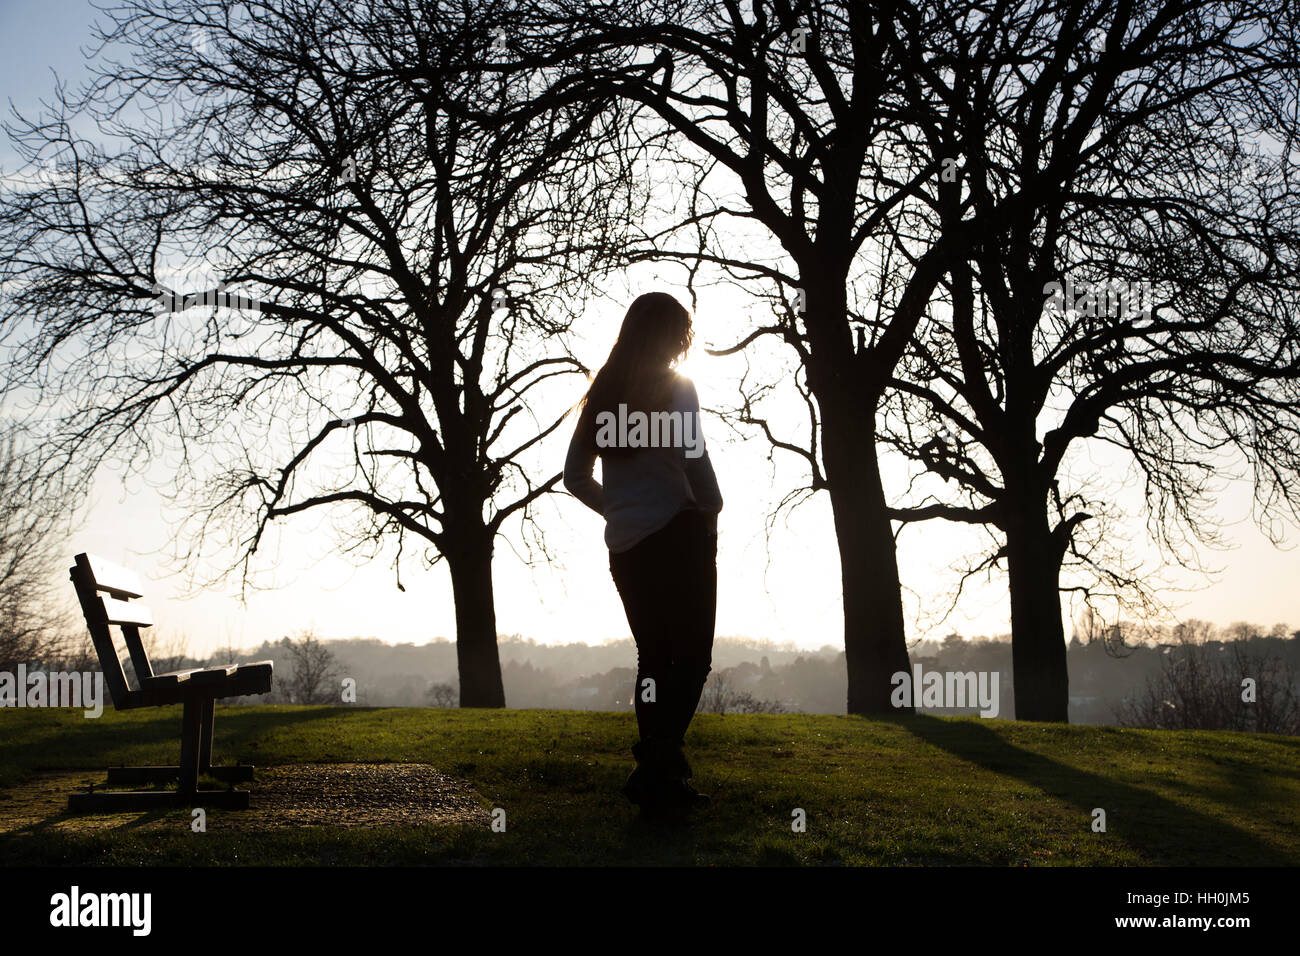 Silhouette of a back view of a woman standing alone by a bench in a quiet location with a light sky and trees. Stock Photo